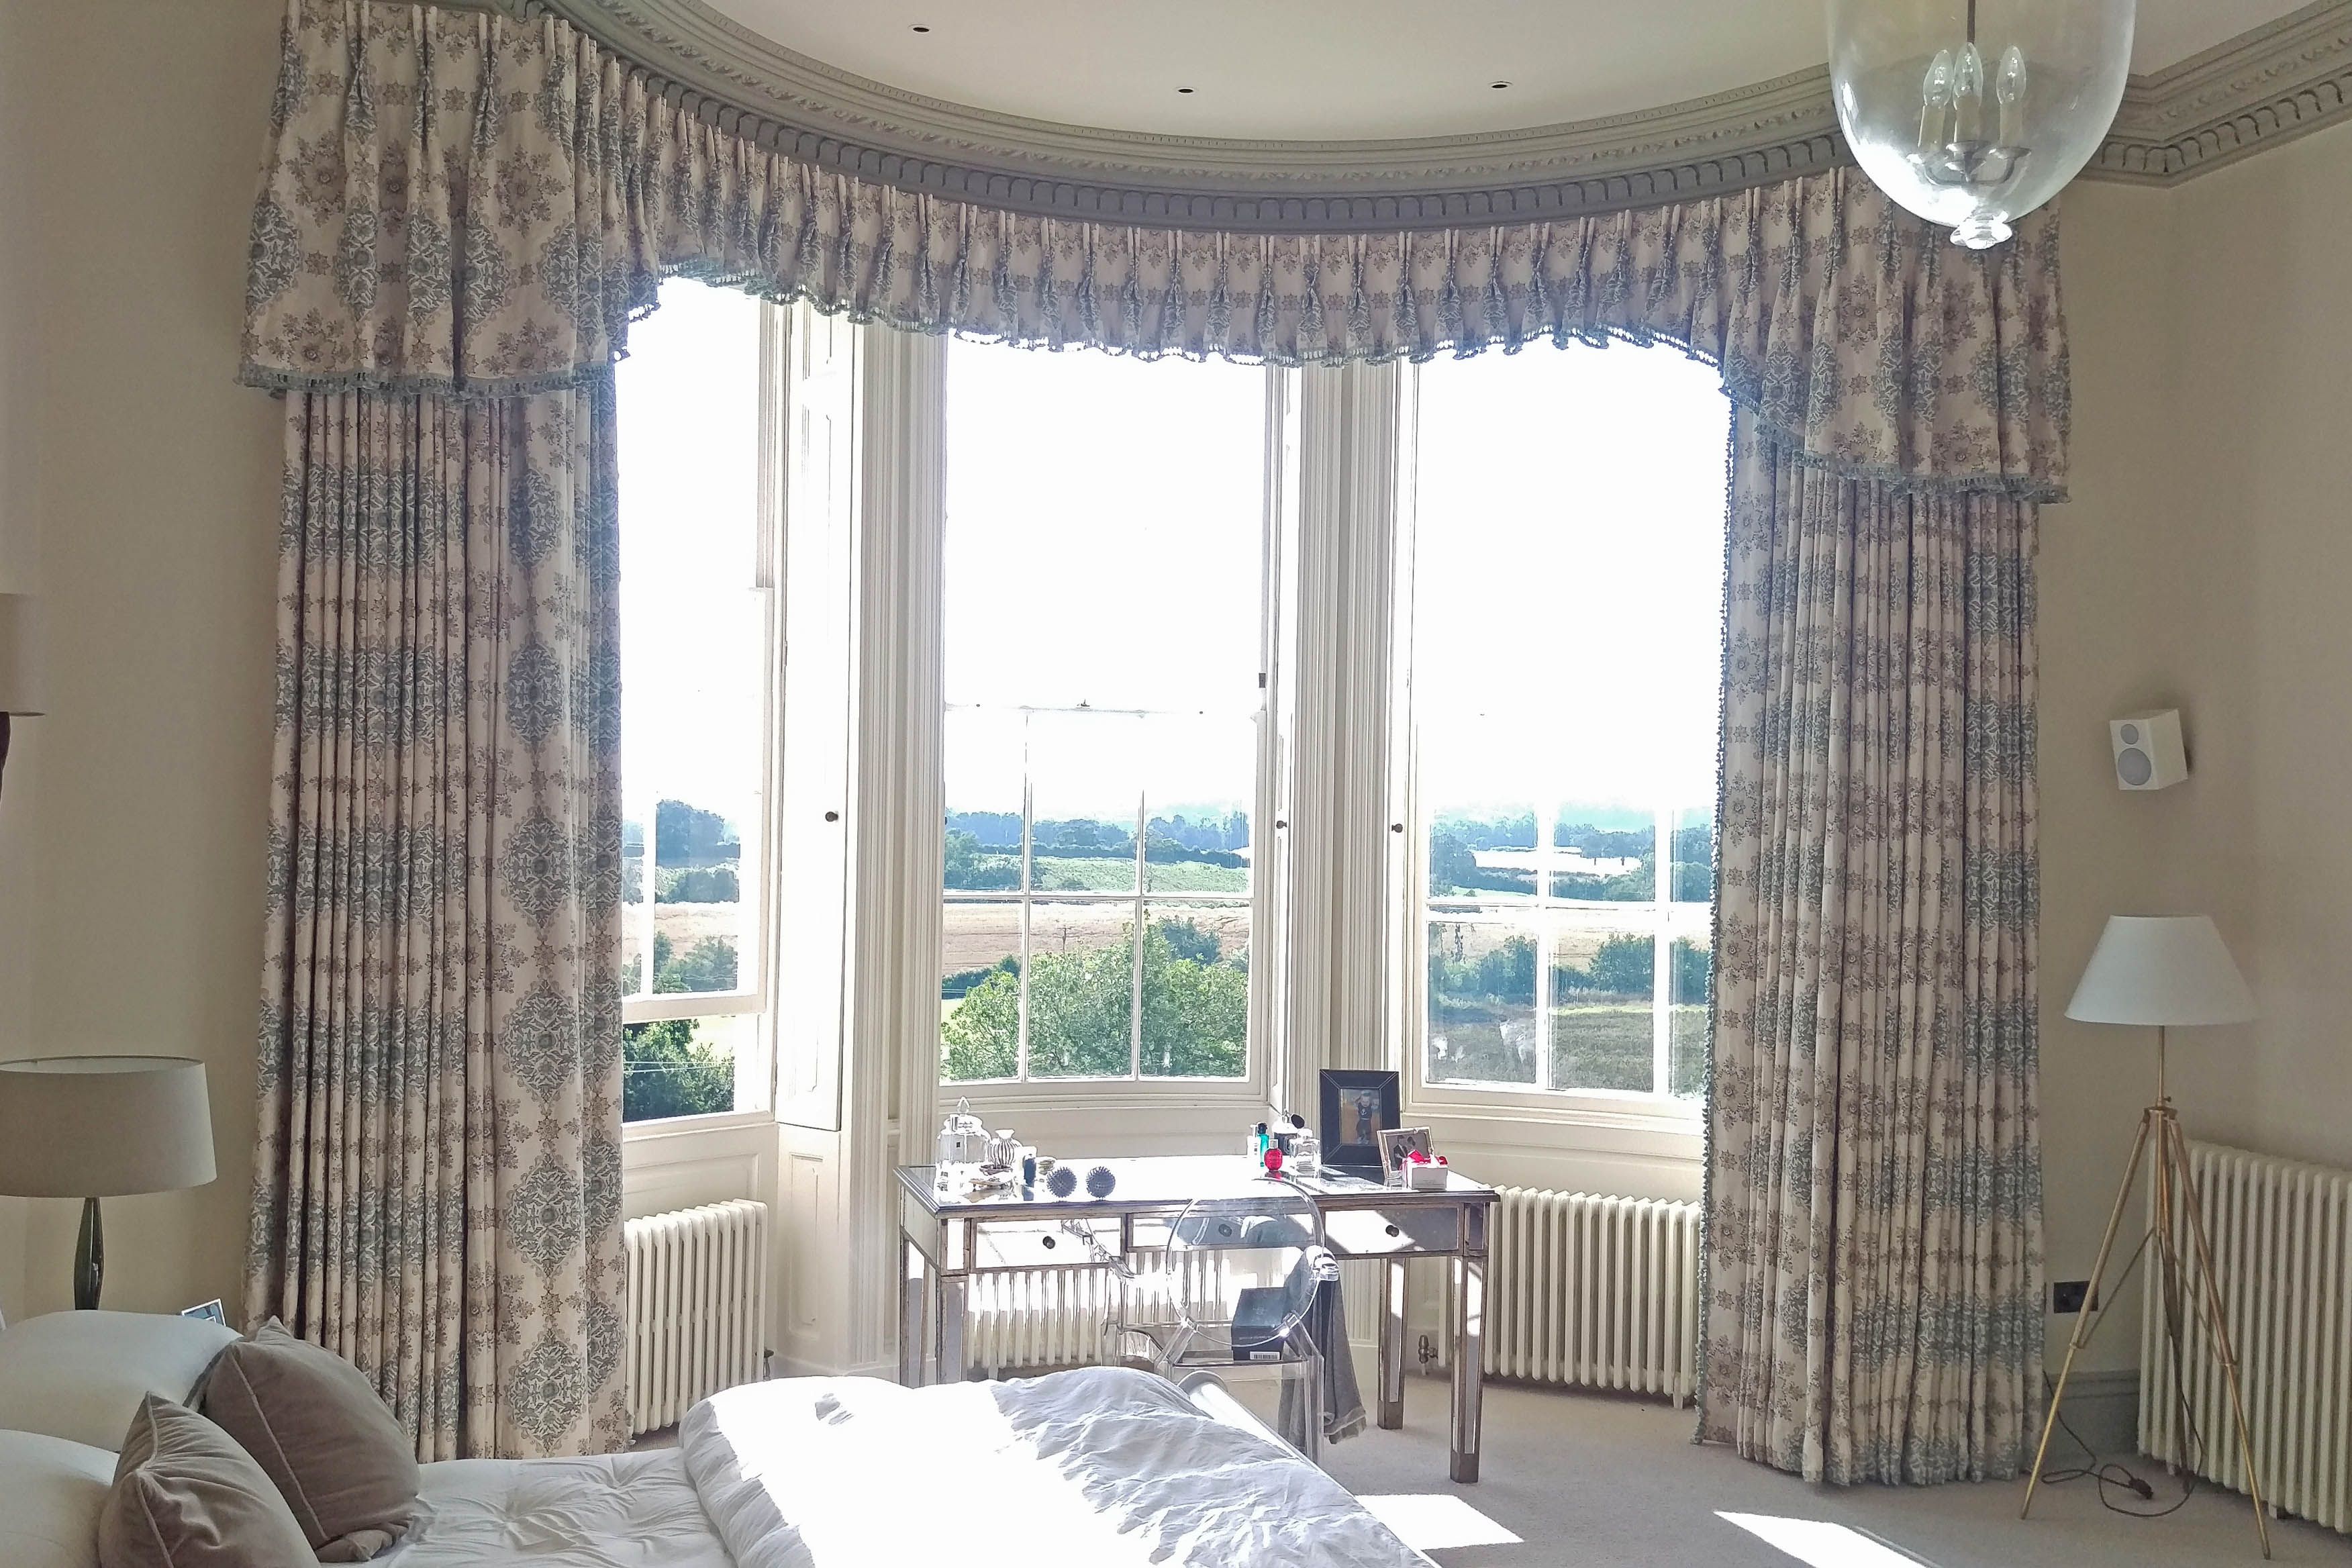 How To Hang Curtains Over A Curved Window